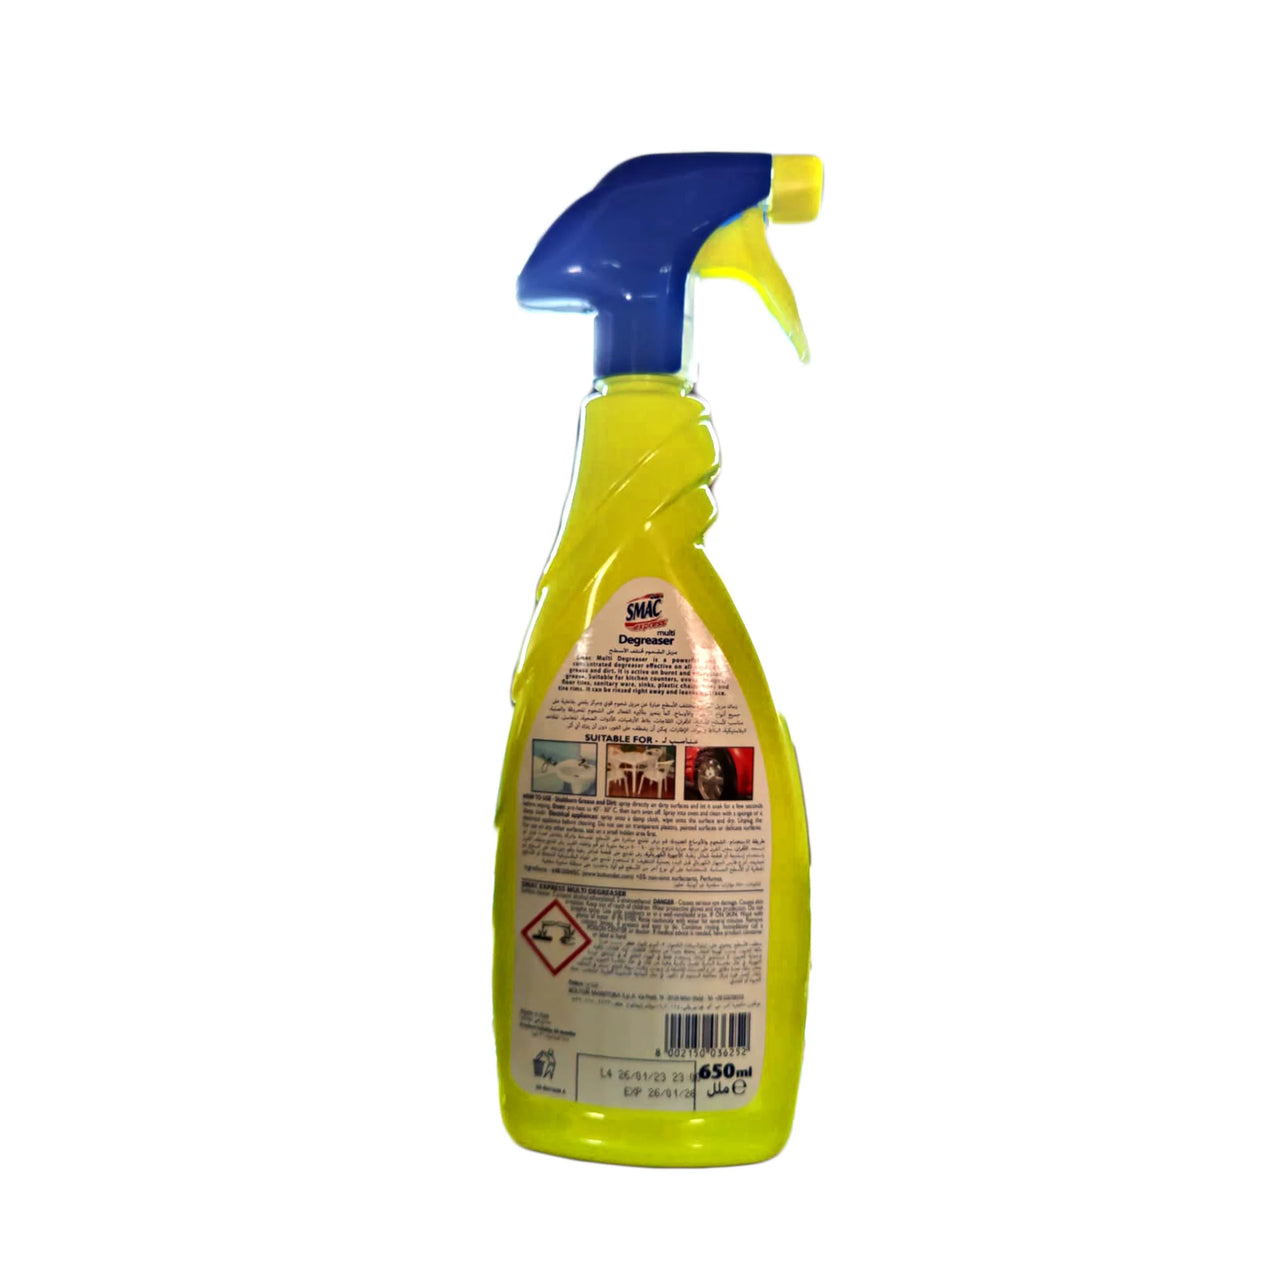 SMAC-Express Degreaser With Lemon-650ml